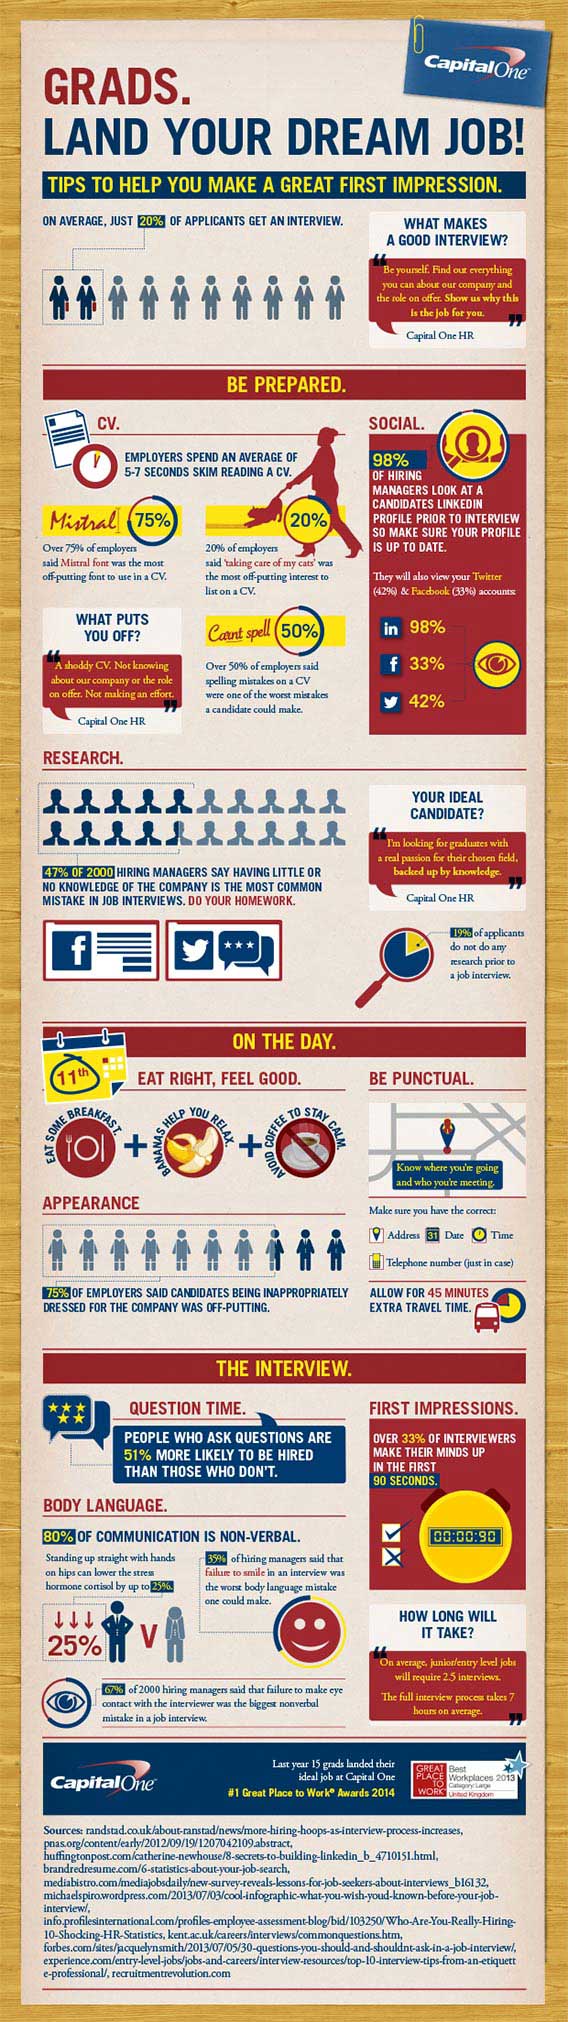 Graduate Recruitment & Job Interview Tips – Infographic by Capital One